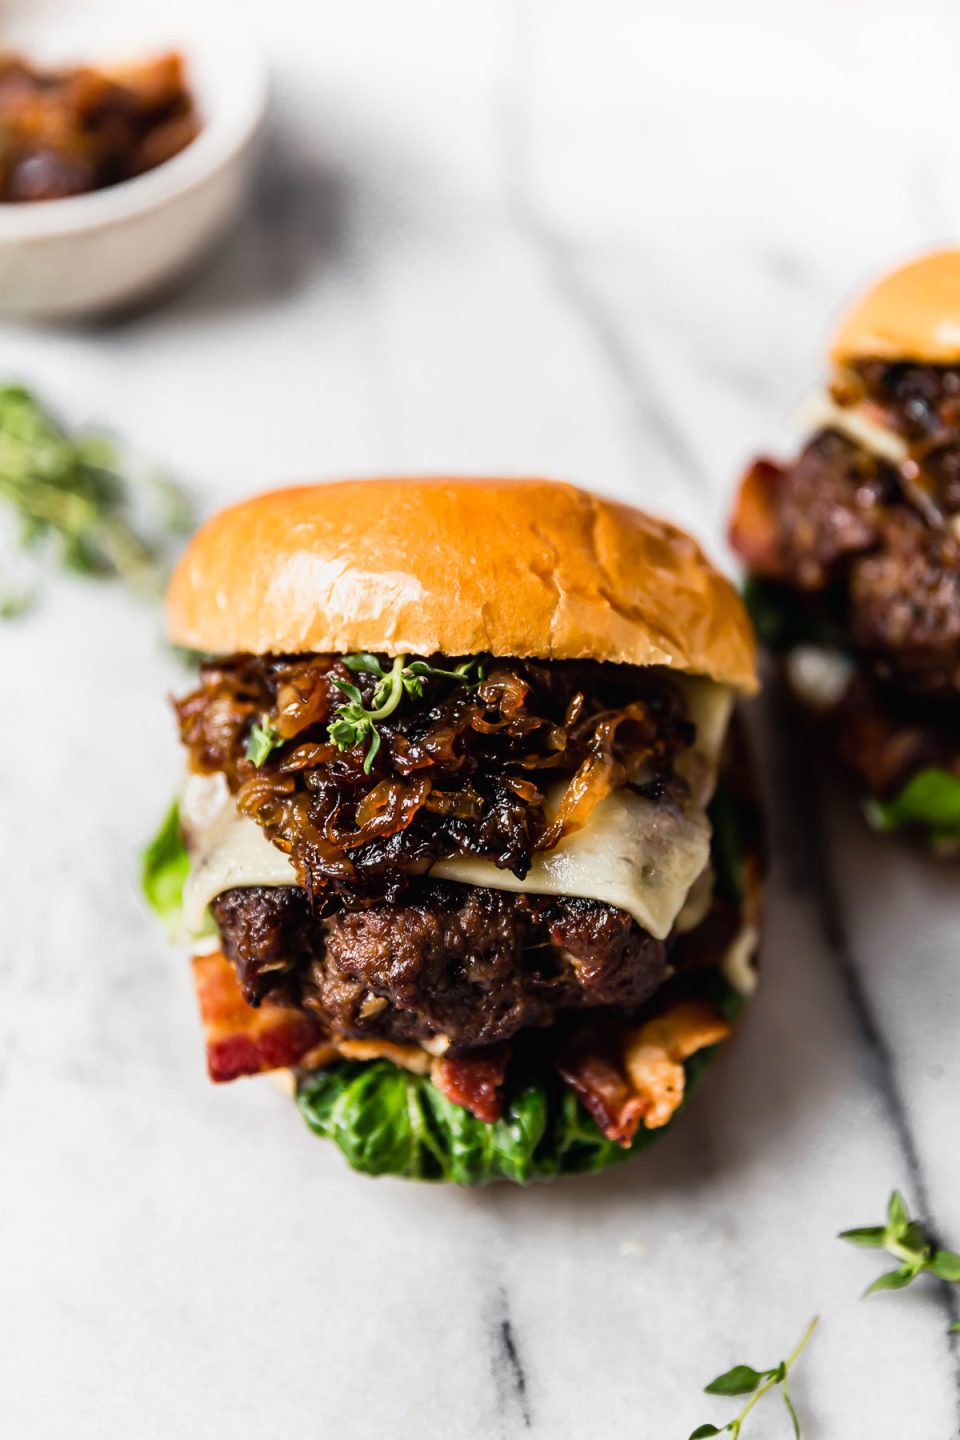 2 French onion burgers on a white marble surface. The burgers are fixed with lettuce, bacon, cheese & caramelized onions, & served on brioche burger buns.